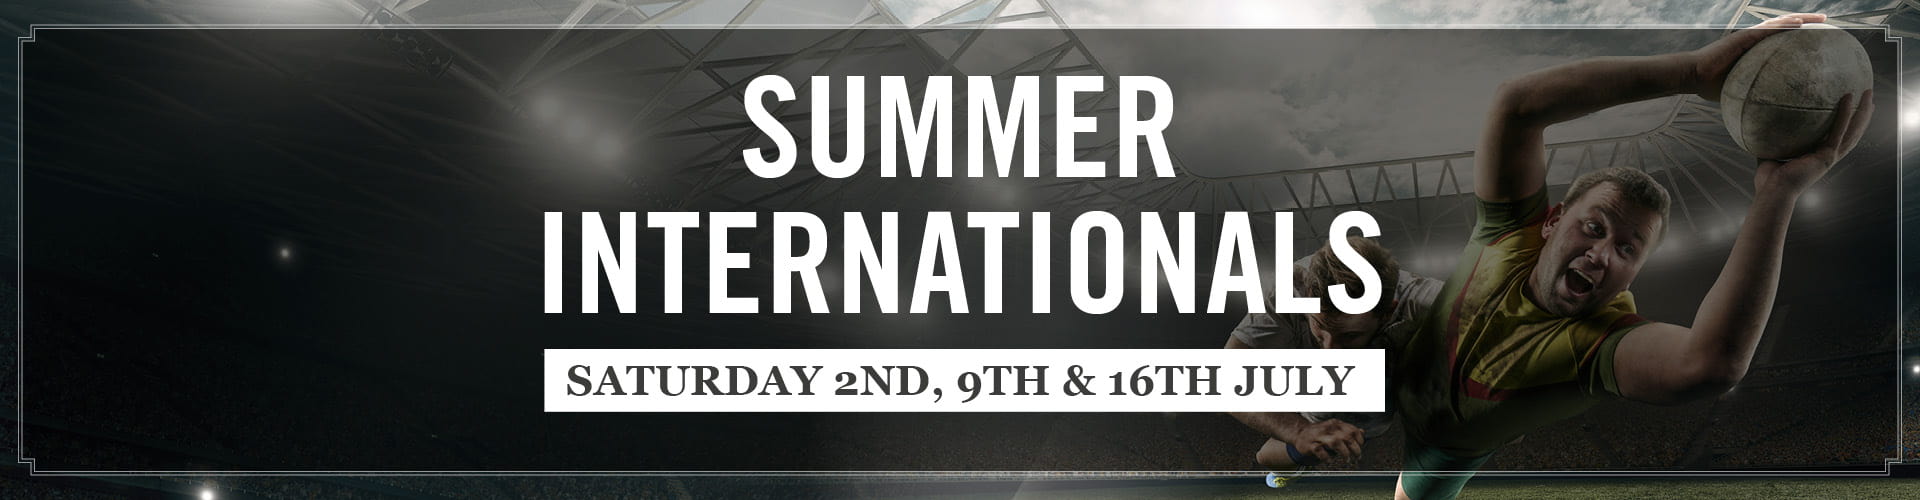 Watch Rugby Summer Internationals live at The Royal Windsor pub in Windsor